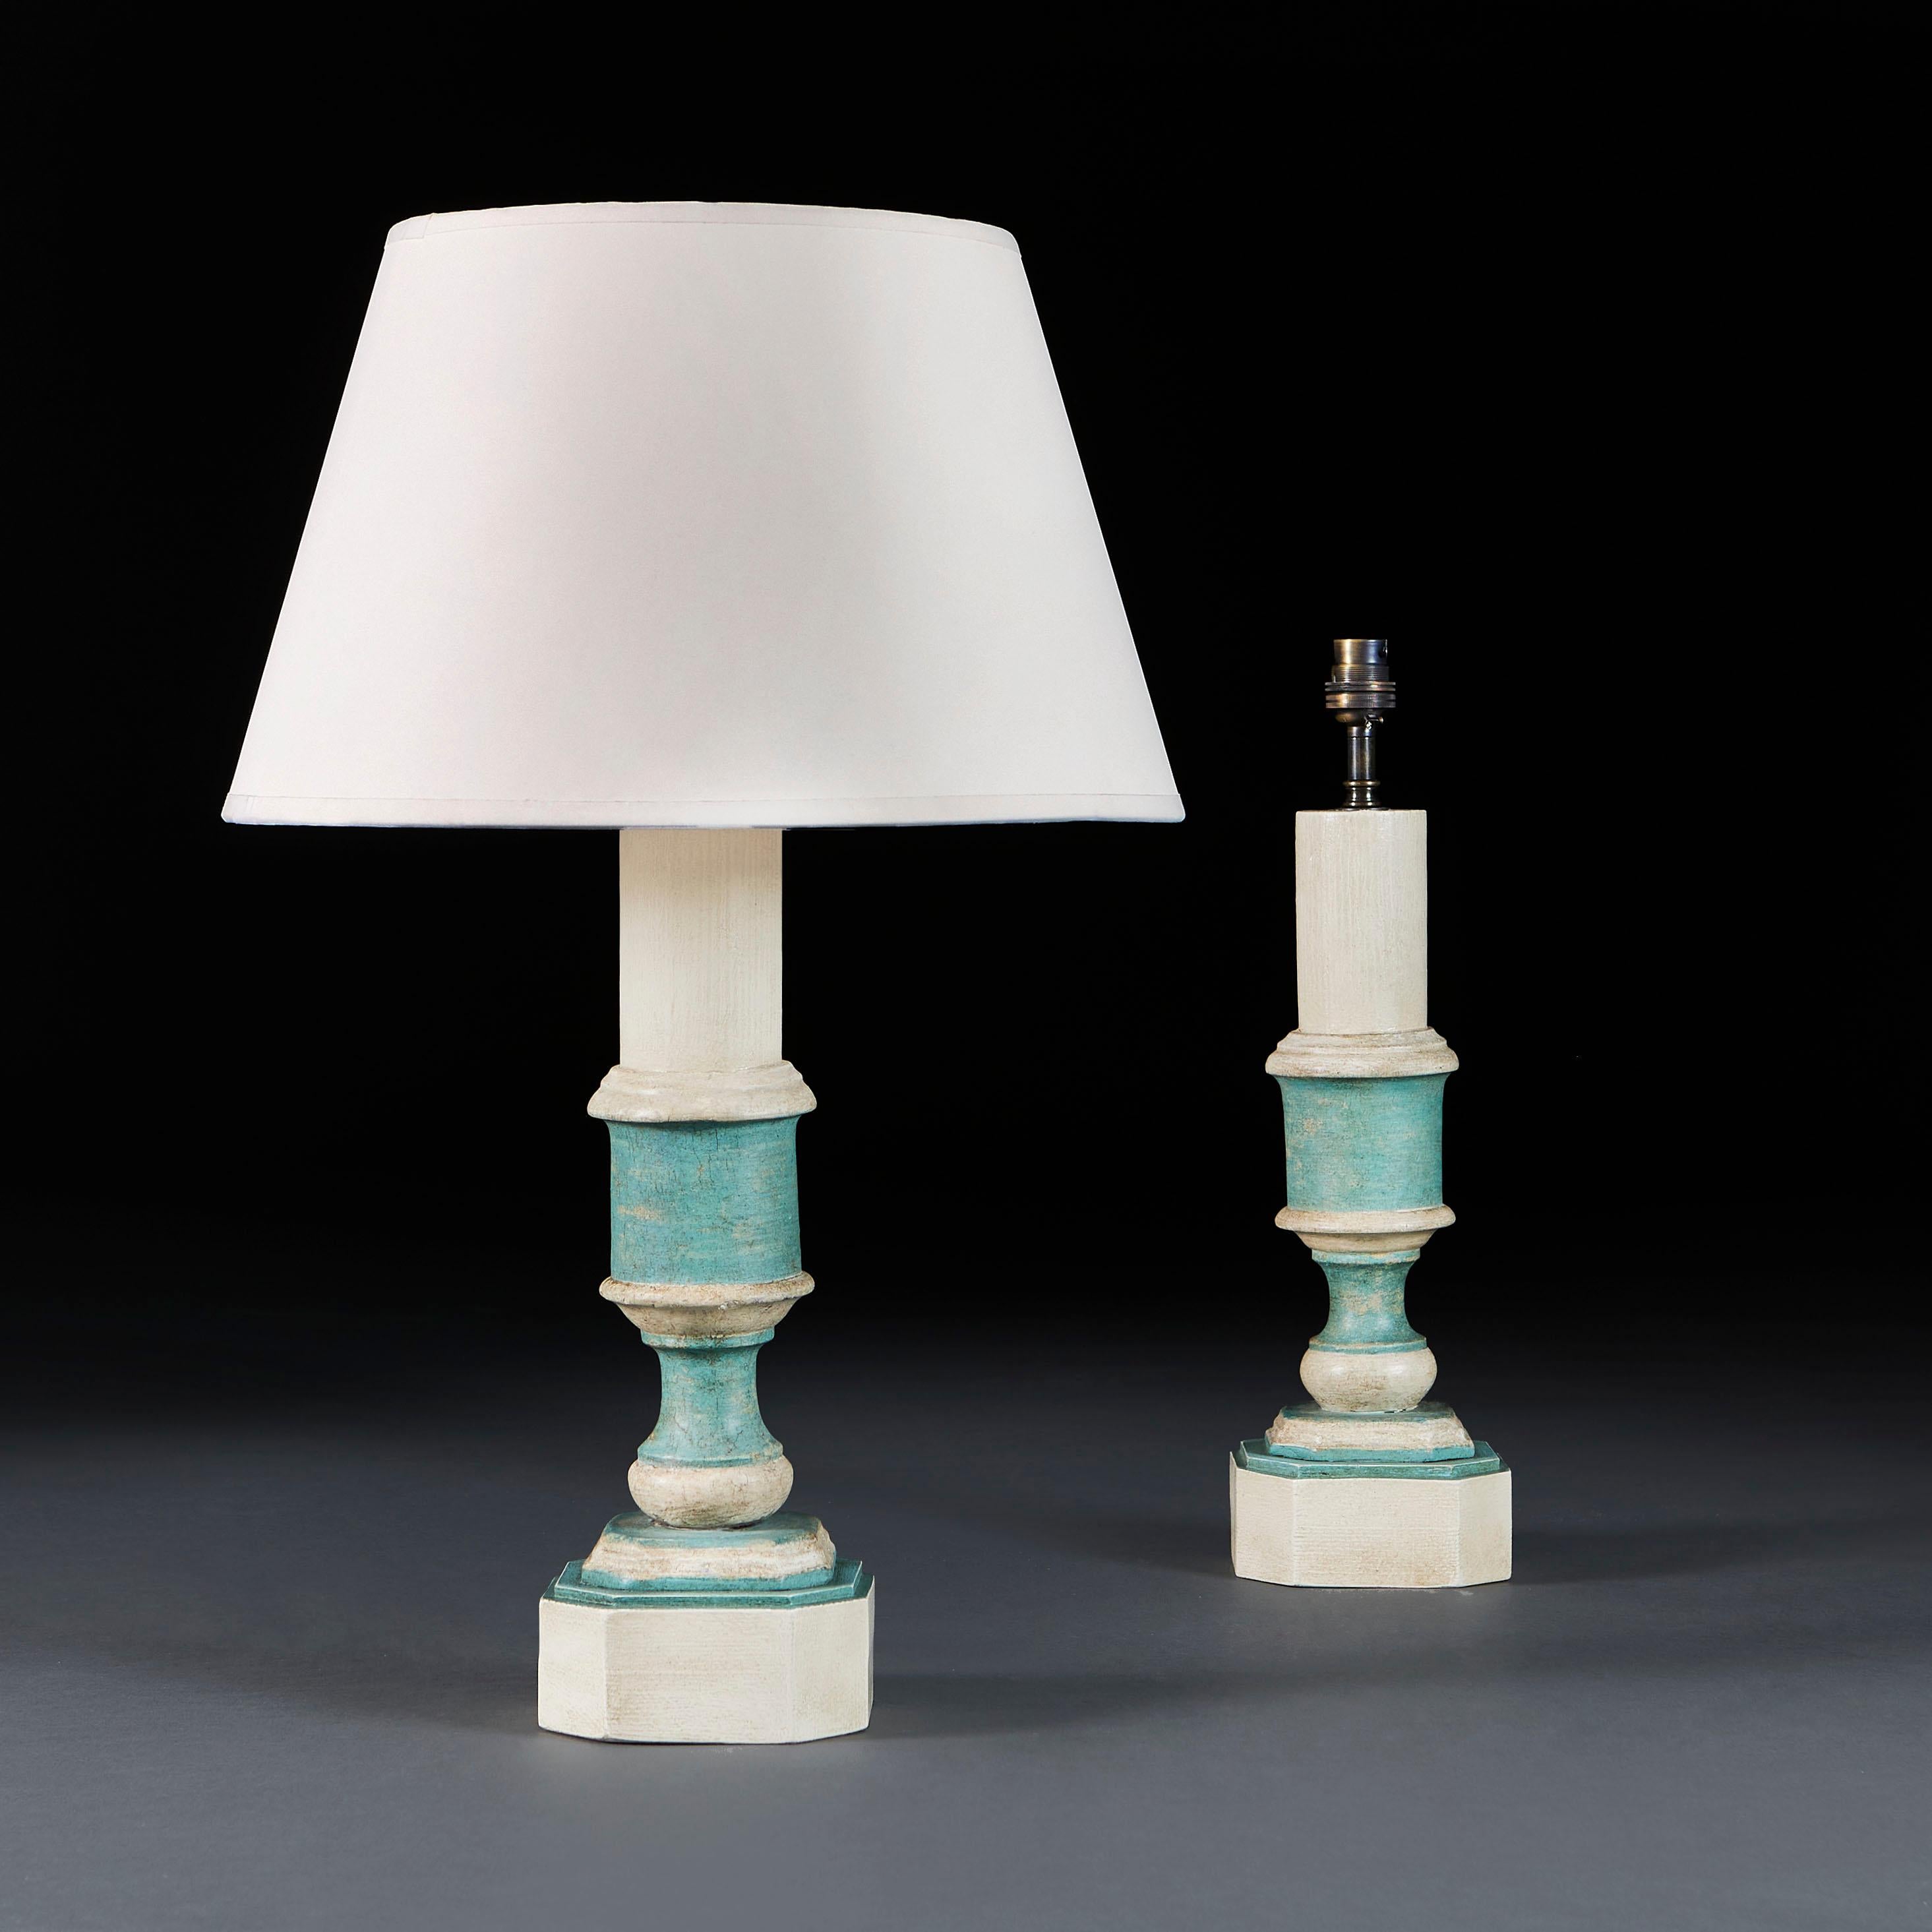 Italy, circa 1890

A pair of late nineteenth century candlesticks painted in ivory and aquamarine blue, now mounted as lamps.

Height 34.50cm
Height with shade 56.50cm
Width 12.50cm
Depth 12.50cm

Please note: This is currently wired for the UK with